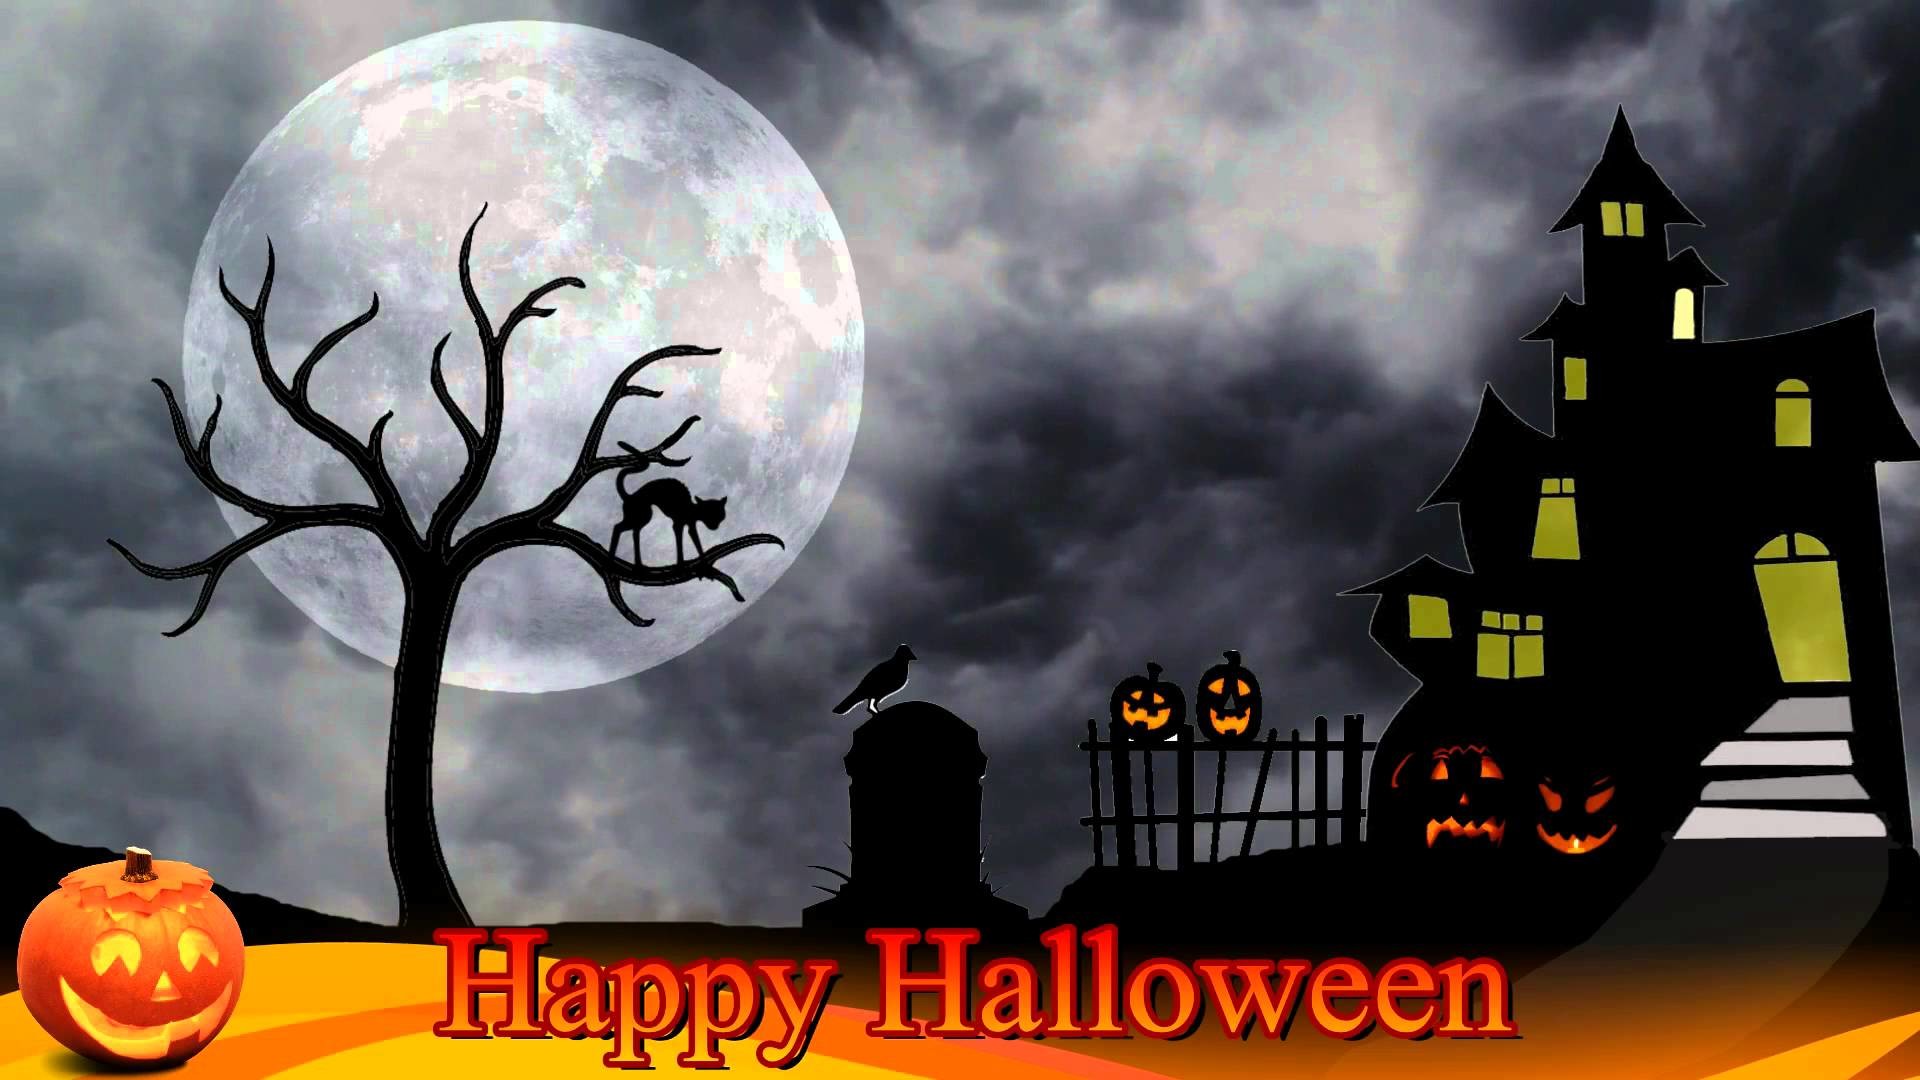 1920x1080 Halloween Background Video - Free motion background video 1080p HD stock  video footage - YouTube